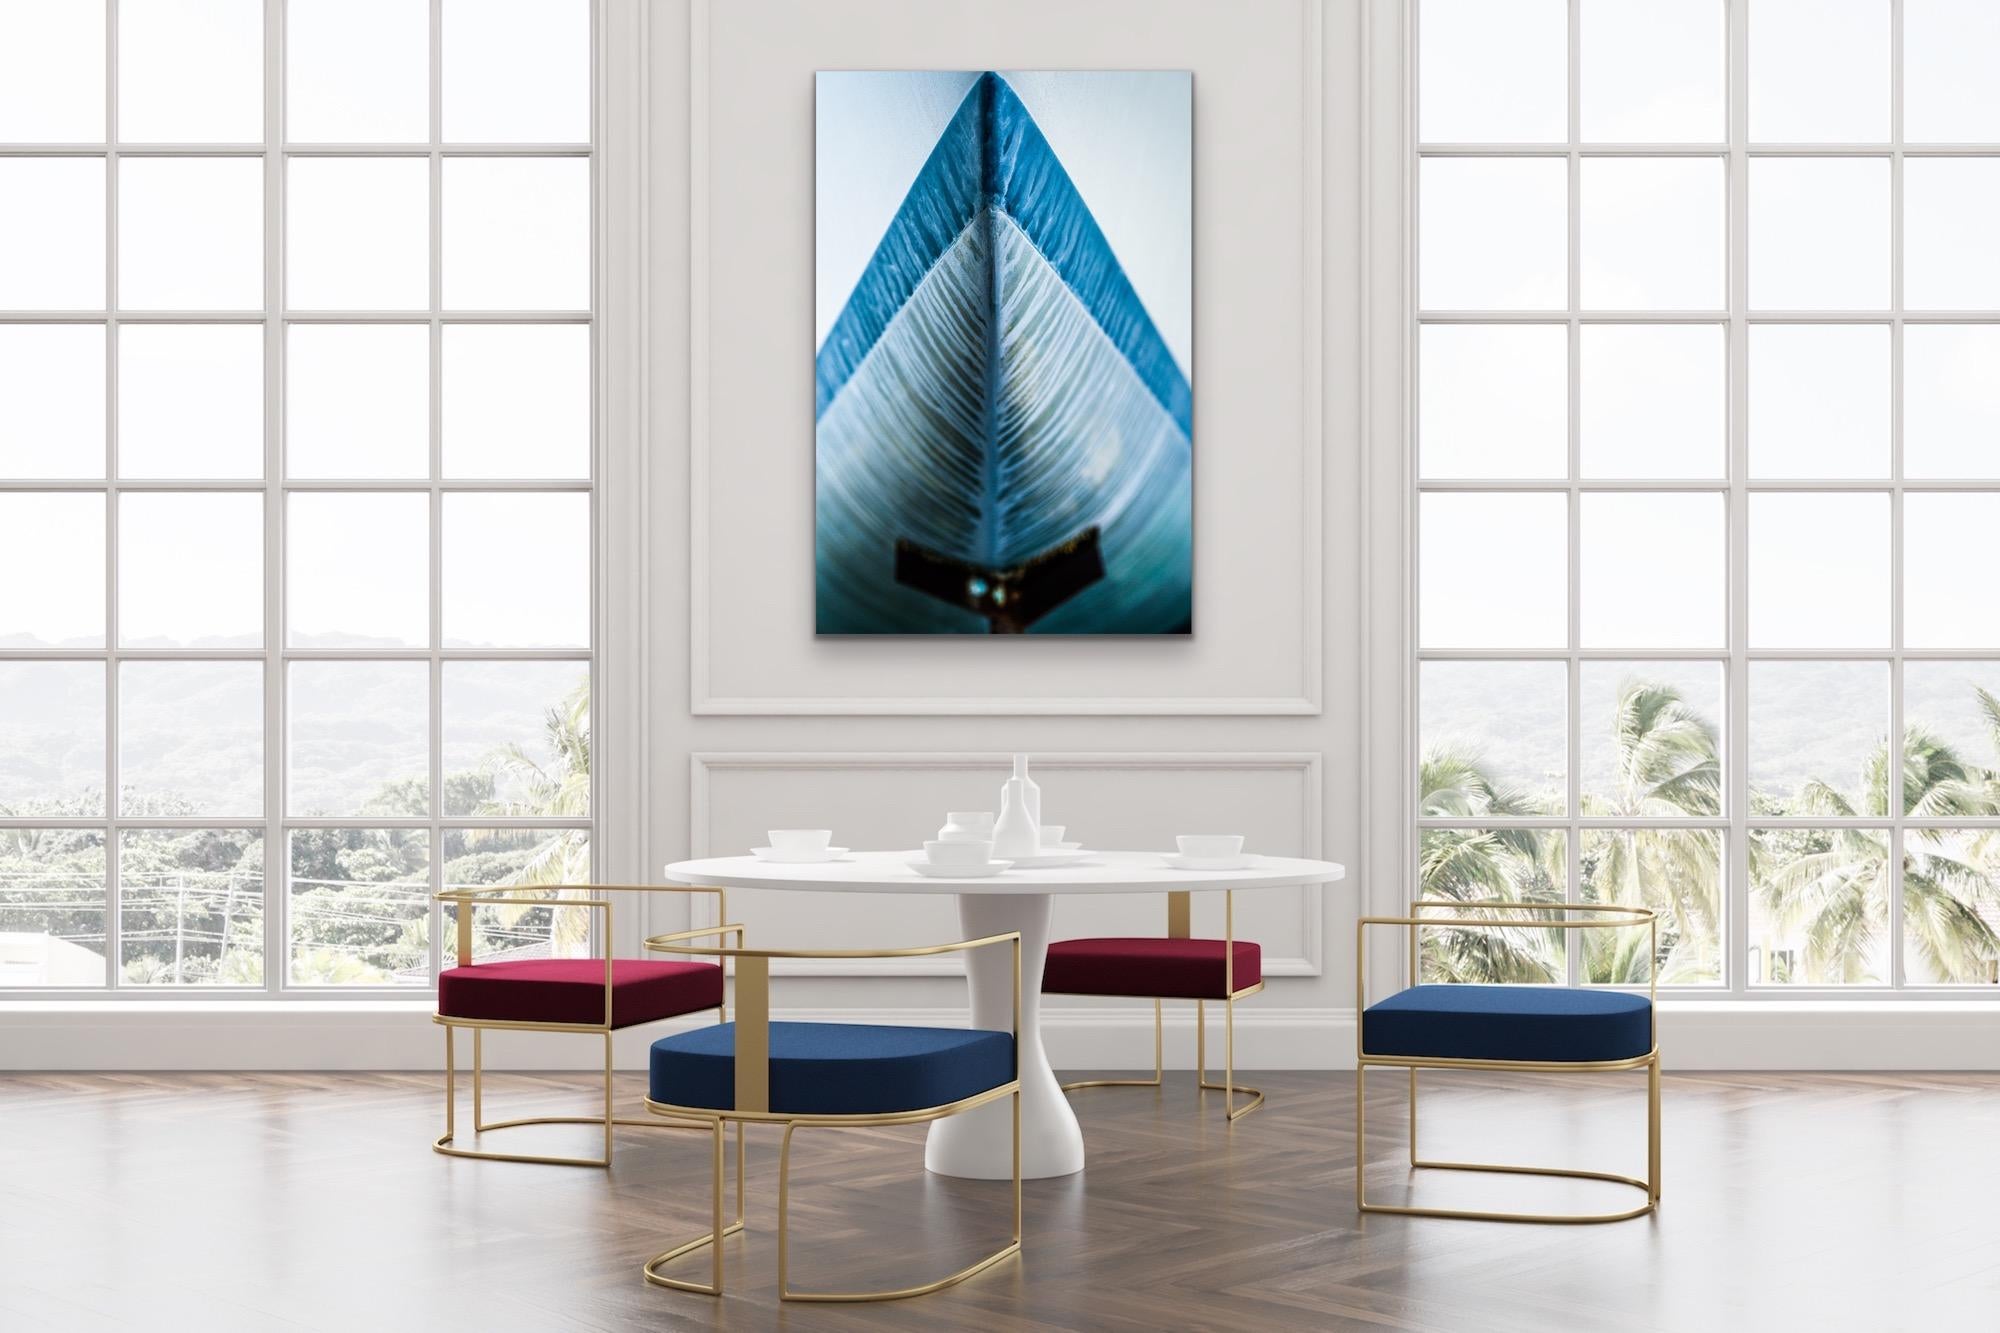 This abstract nautical contemporary photograph by Peter Mendelson pictures a close-up view of a blue boat prow. The image is shot from an angle that creates a triangular shape with a the blue rim of the boat pointing upward. White streaks the blue